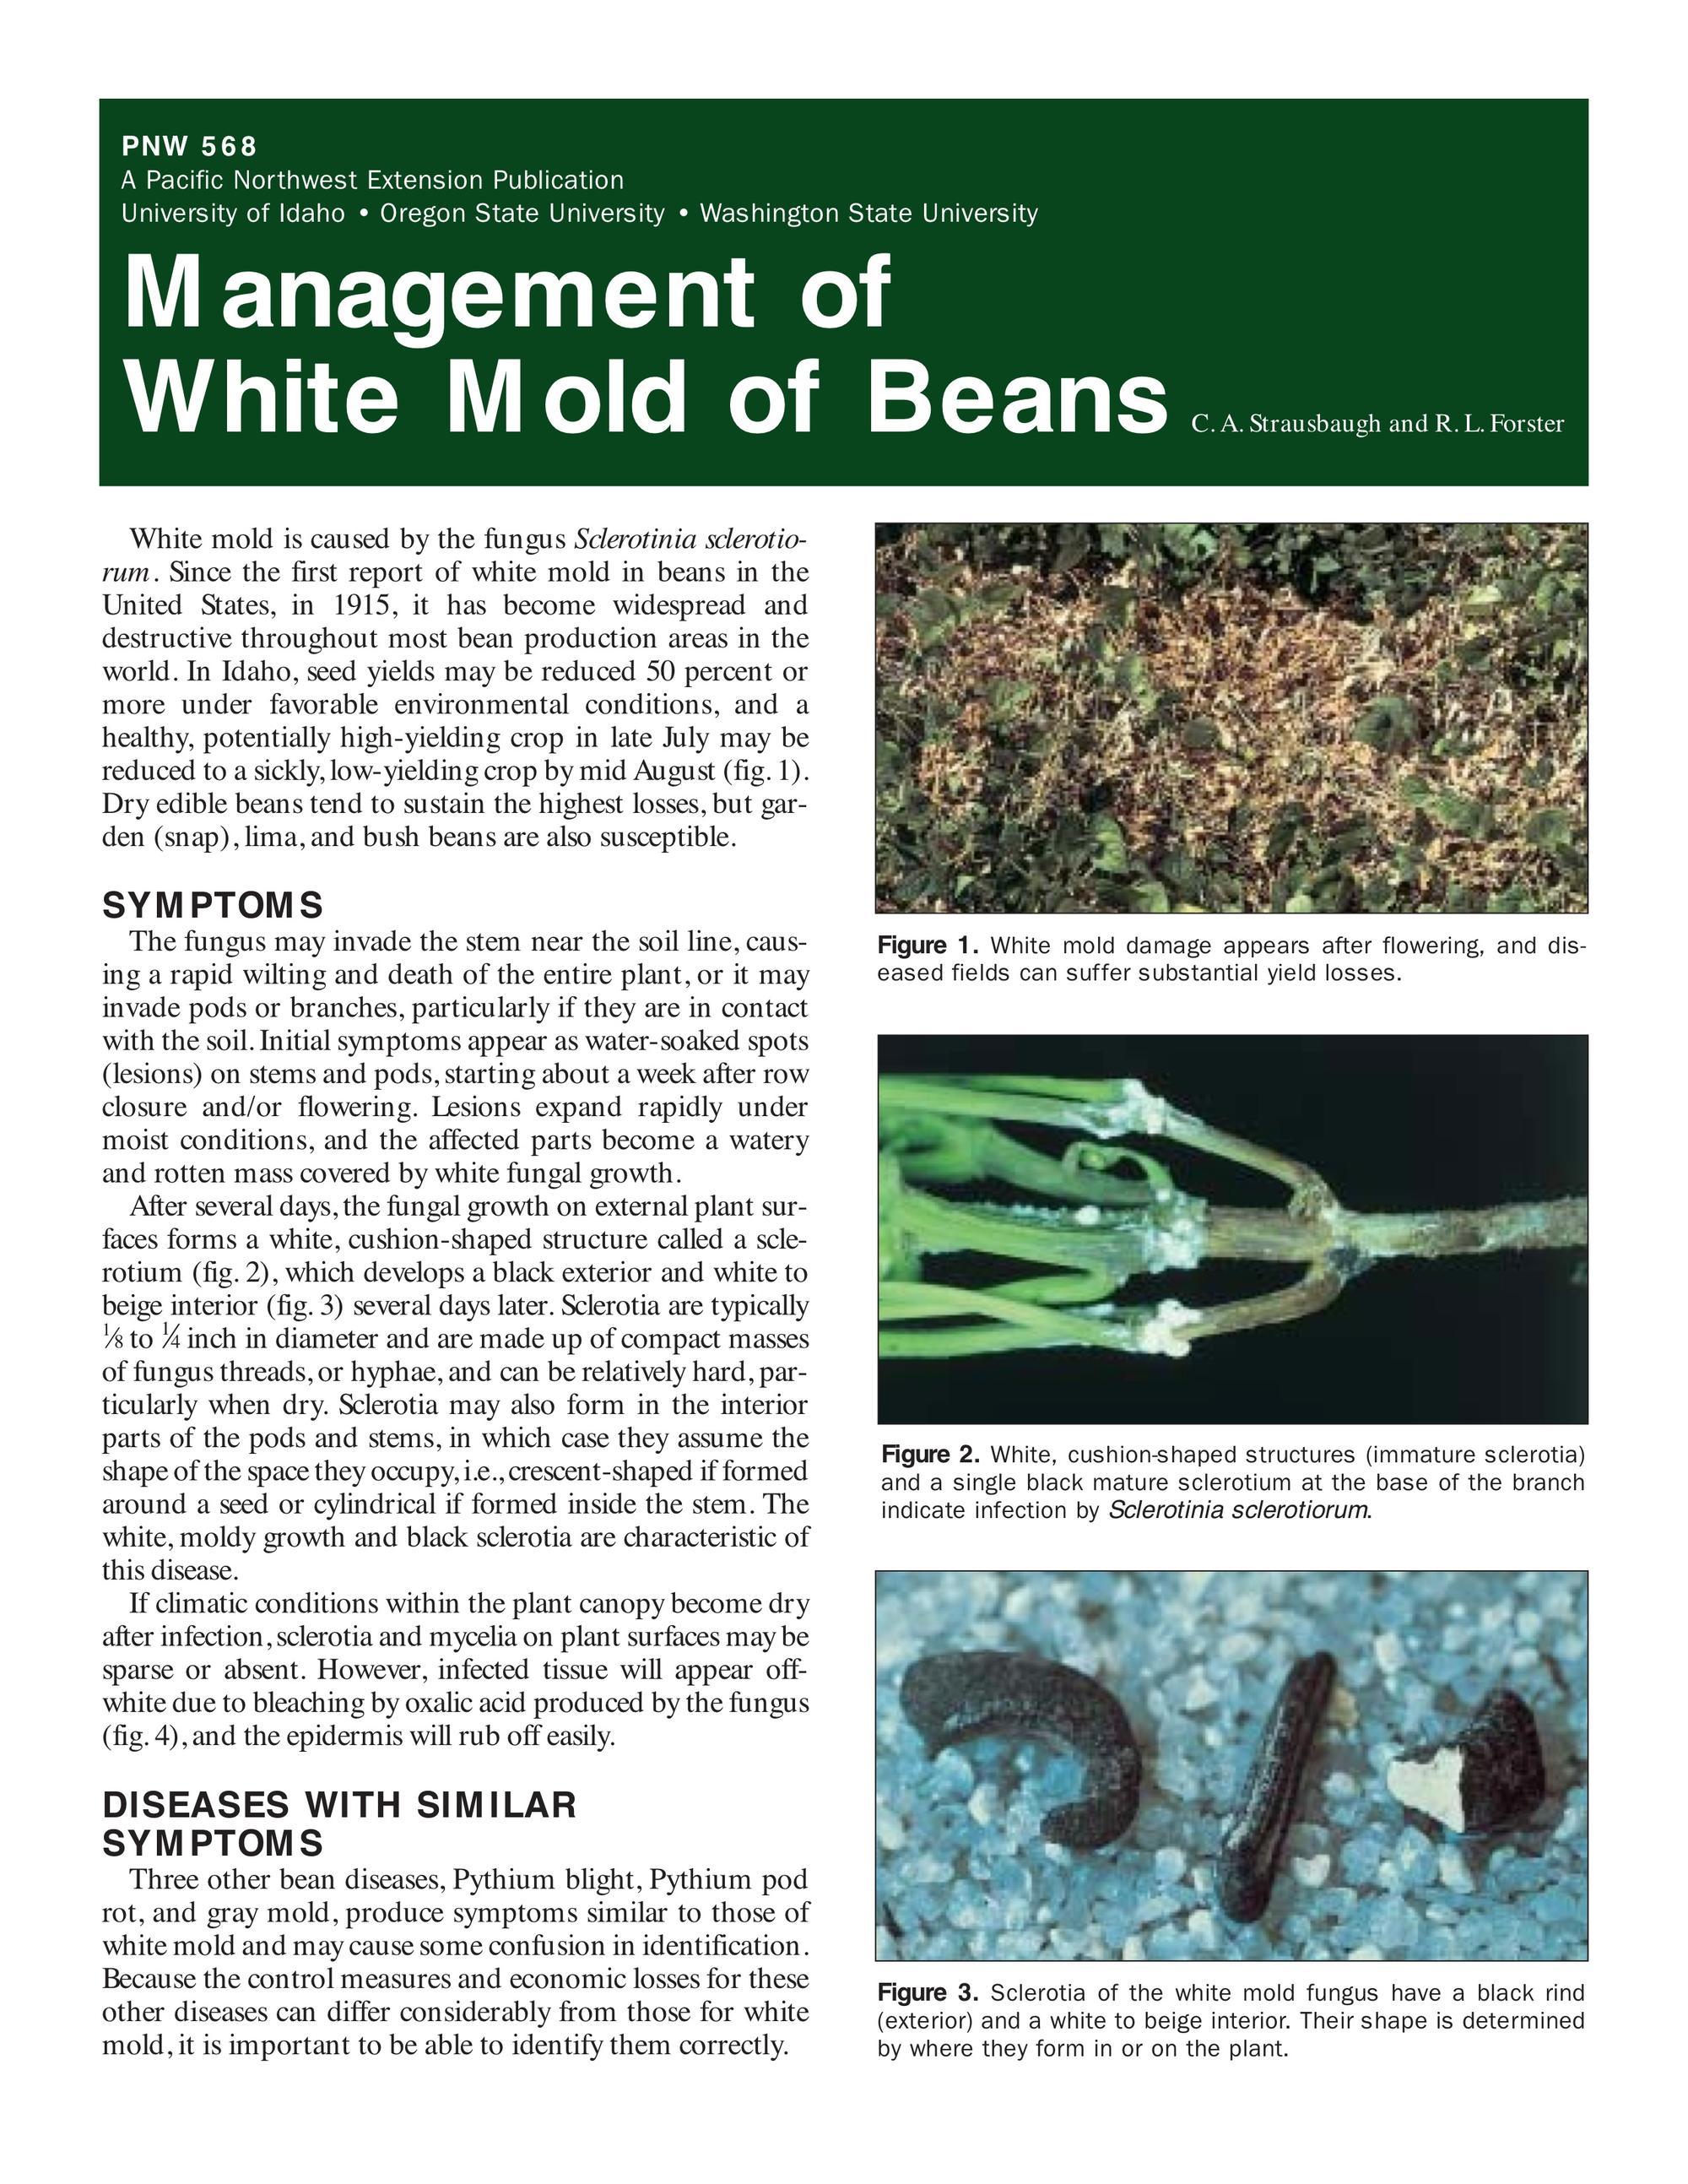 Image of Management of White Mold of Beans publication